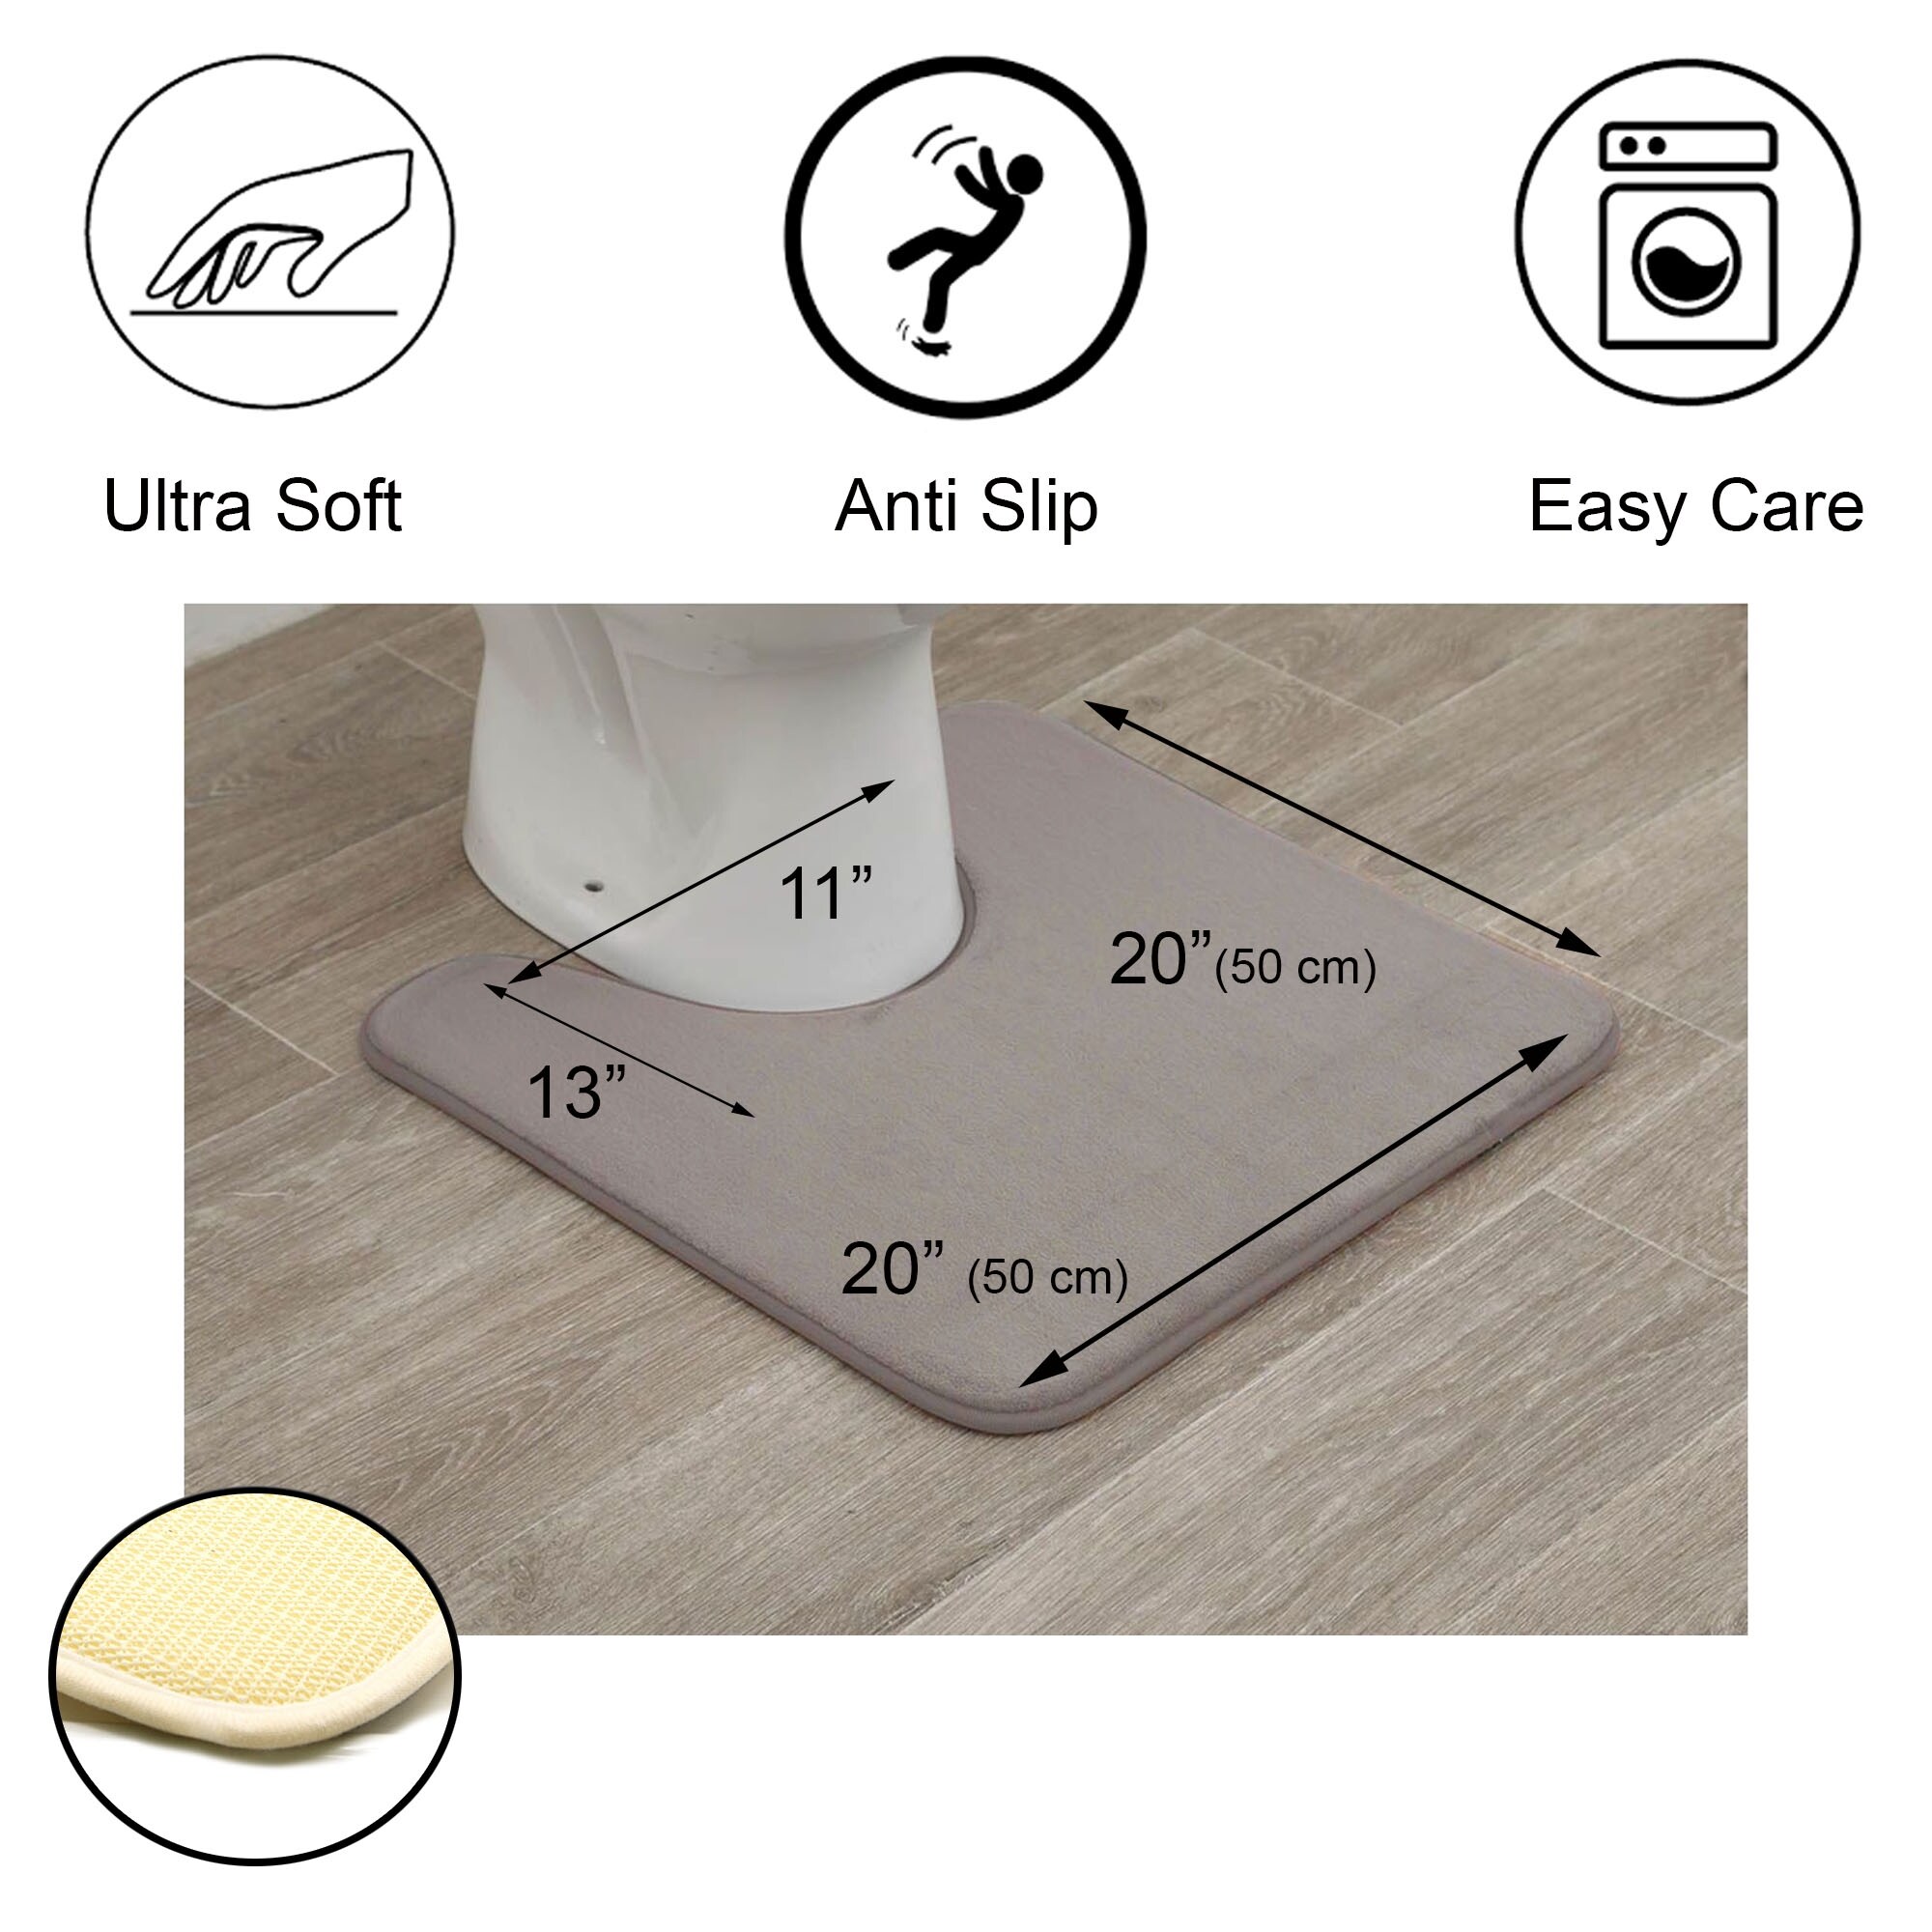 https://ak1.ostkcdn.com/images/products/is/images/direct/ad1fd947ba895d5d8e9e7d2410361b97598f9aff/Contour-Bath-Rug-Memory-Foam-Mat-White-20%22L-x-20%22W.jpg